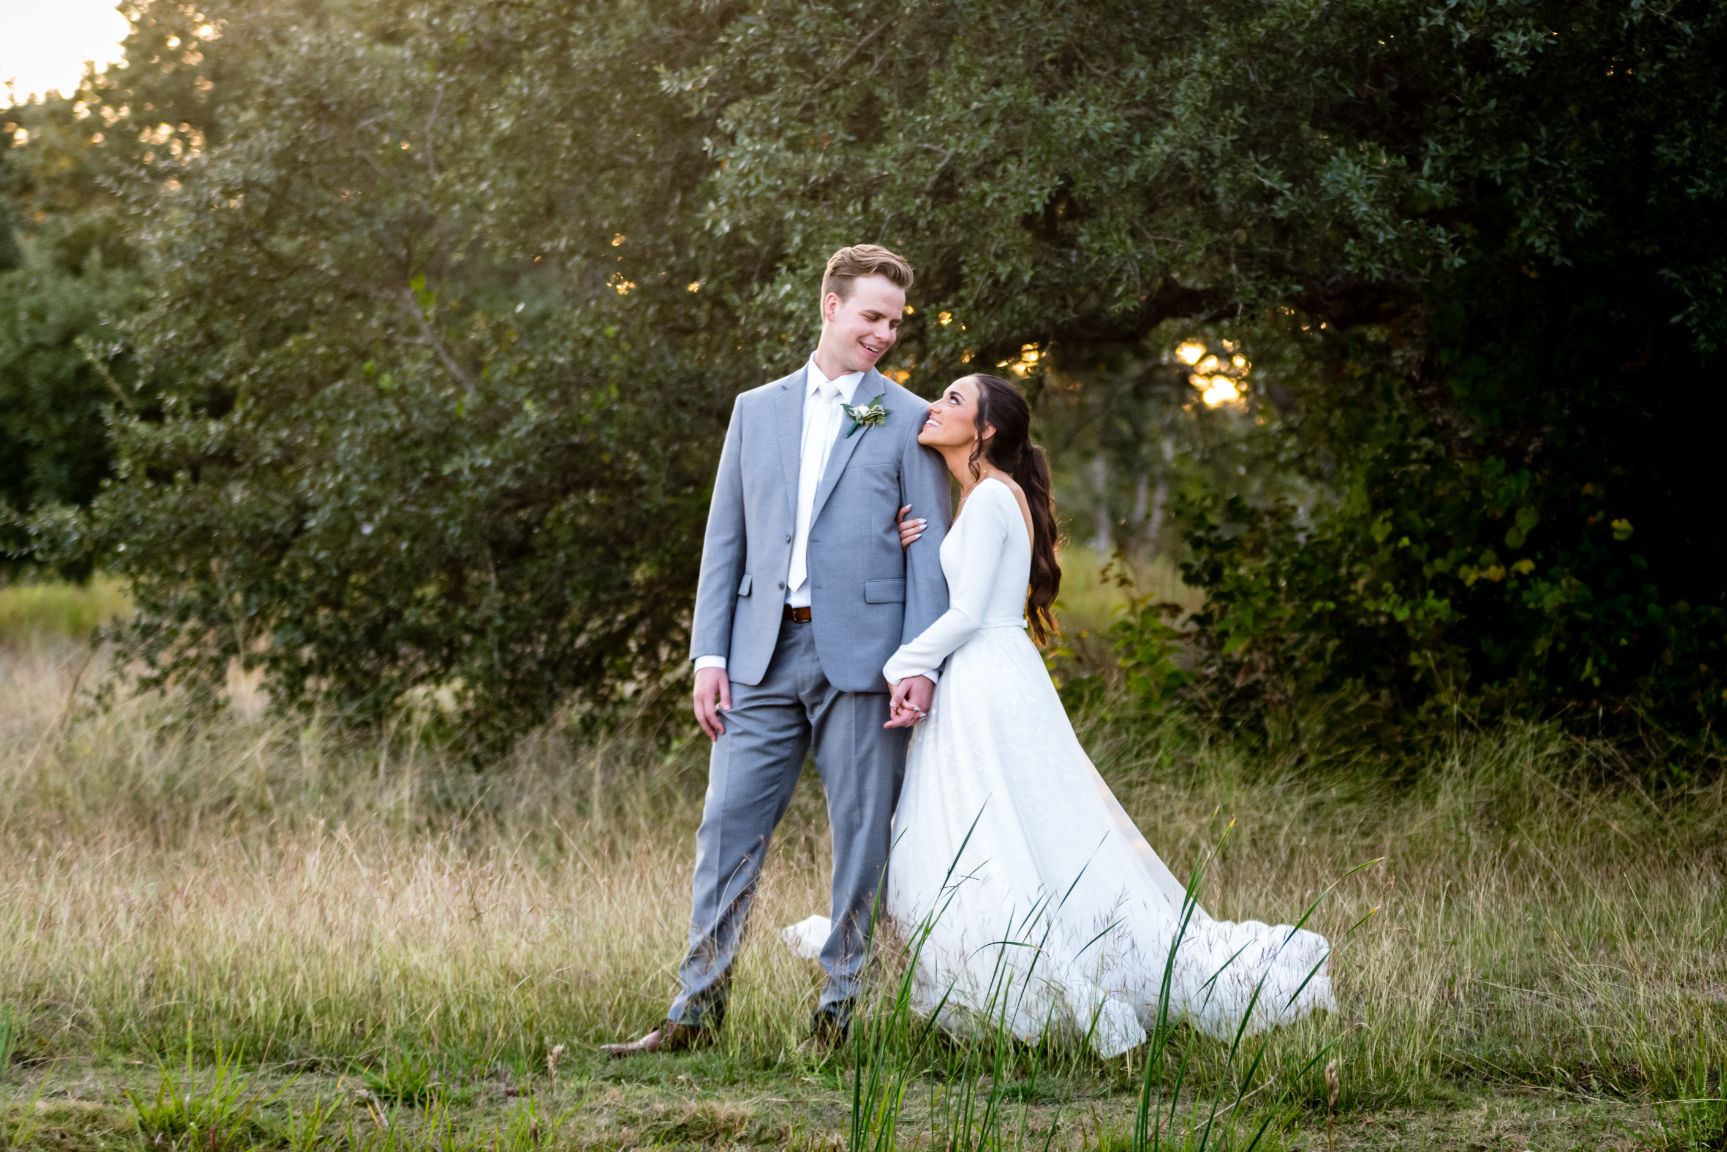 Bride wearing white dress with long sleeves holds hands with groom wearing gray suit in front of large green oak trees. 